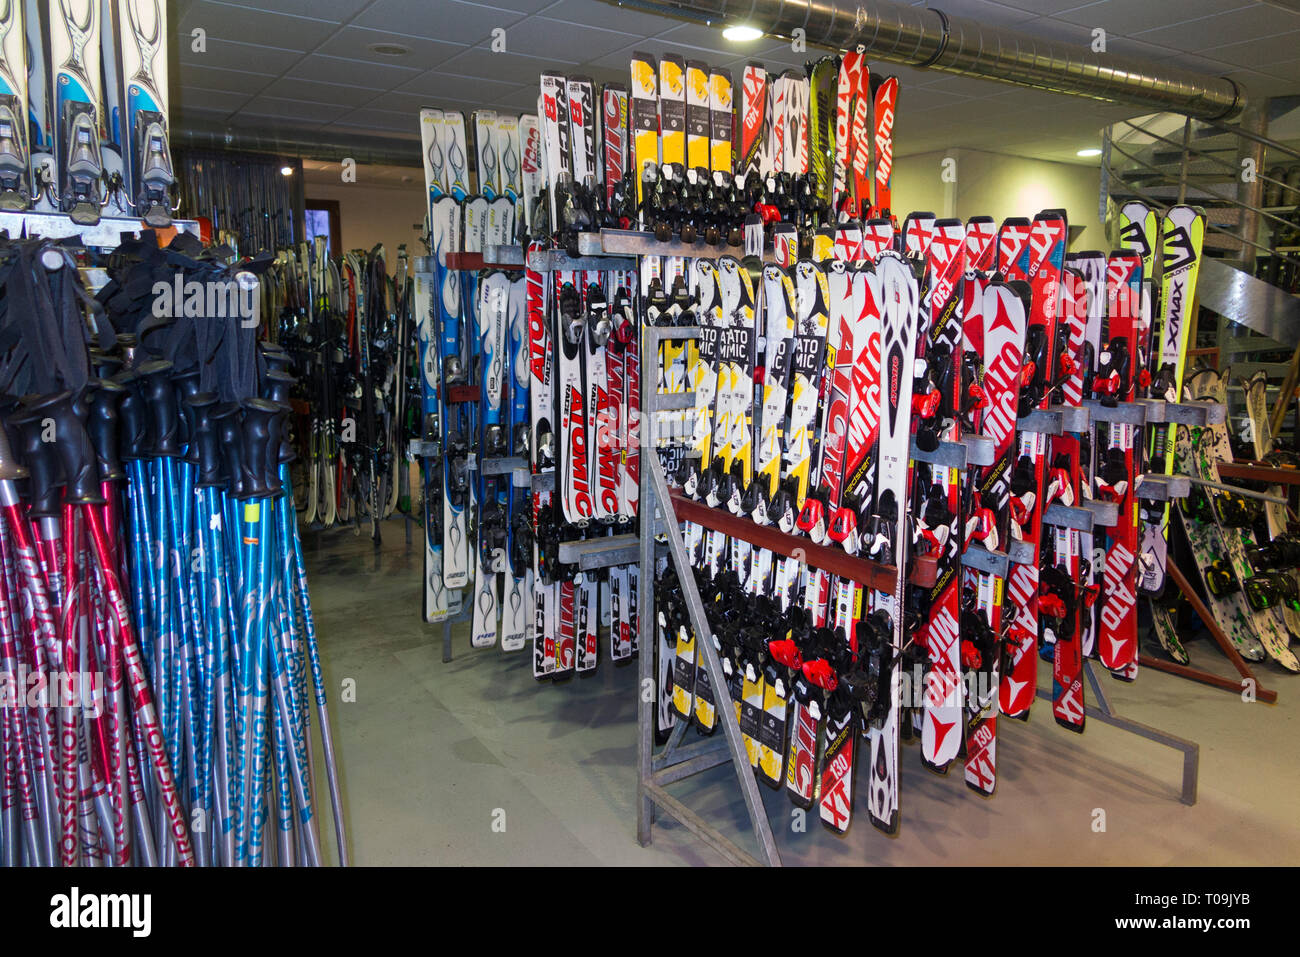 Ski equipment and accessories / skis for hiring / ski pole / poles for hire in the French Alpine resort of  France. (104) Stock Photo